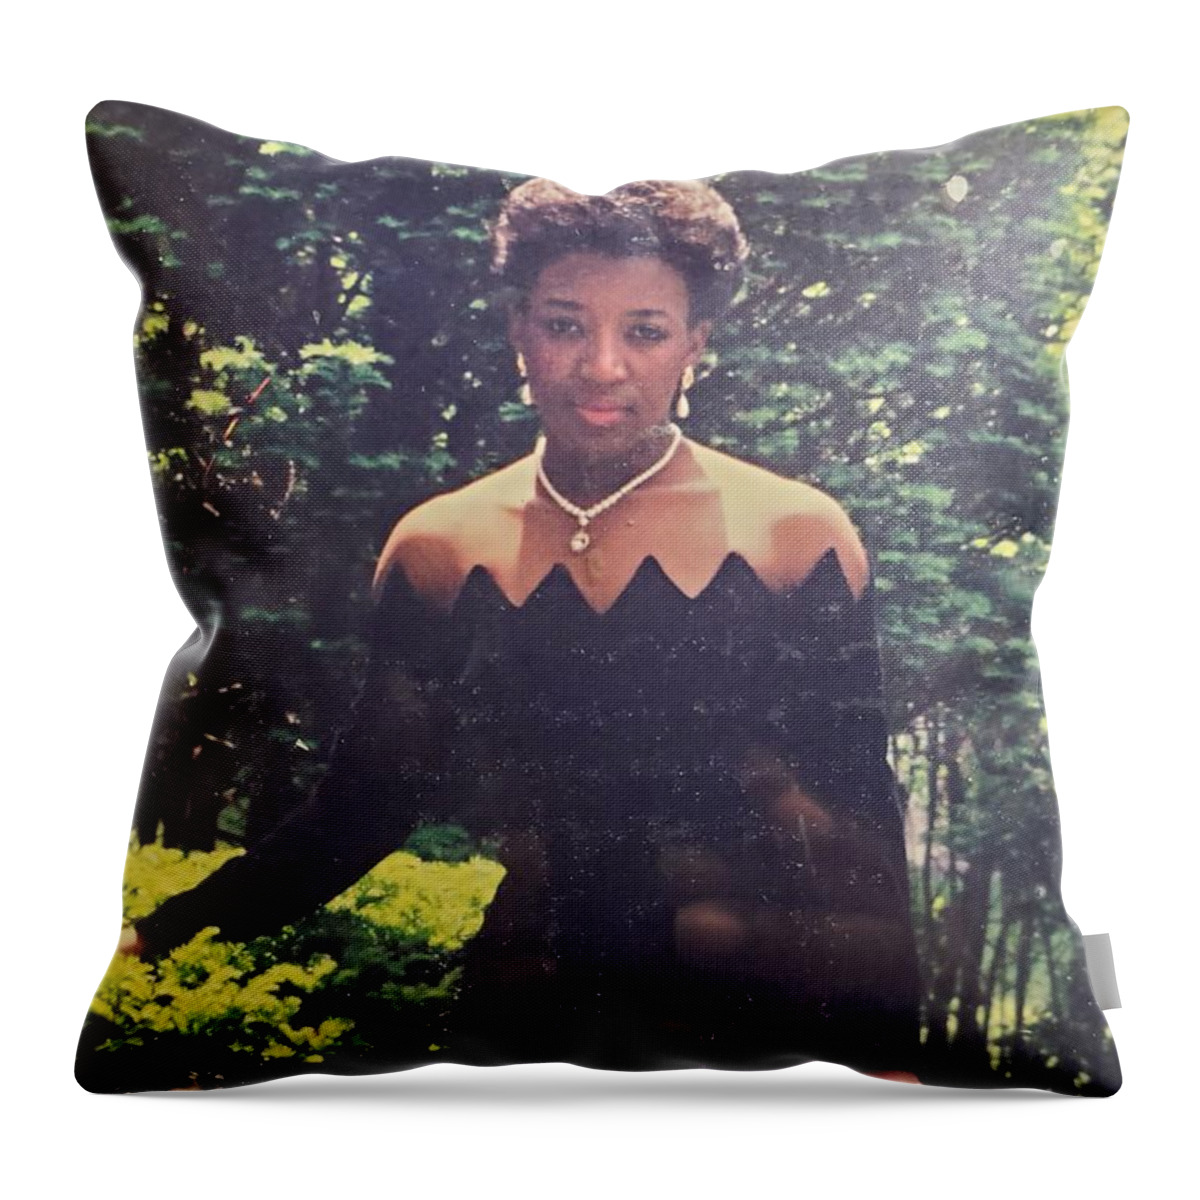  Throw Pillow featuring the photograph Merl by Trevor A Smith